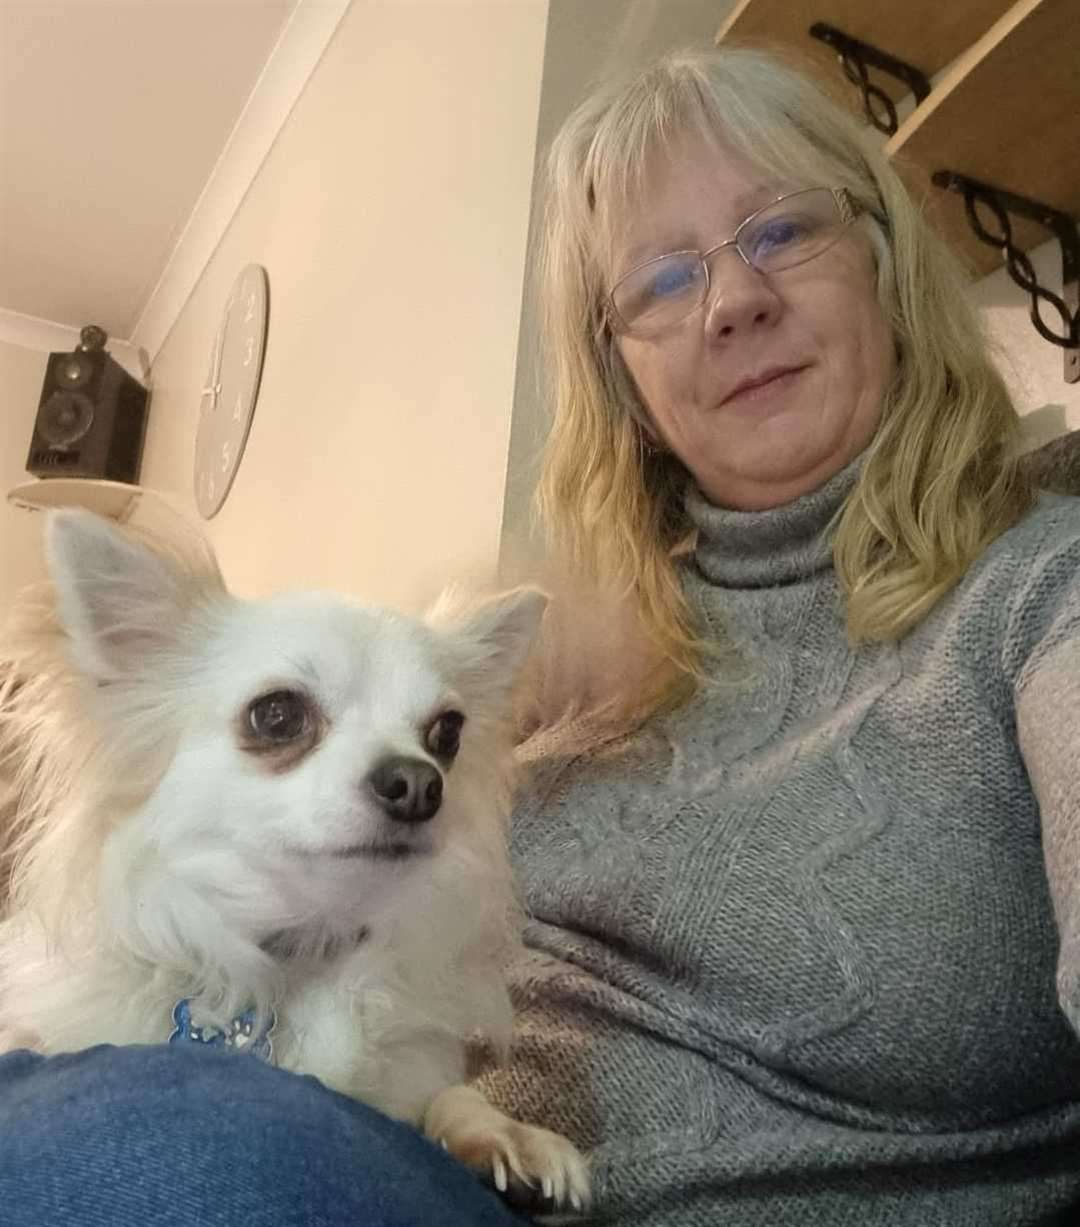 Molly Green's pet Chihuahua was attacked by a larger dog in Breadlands Road, Ashford